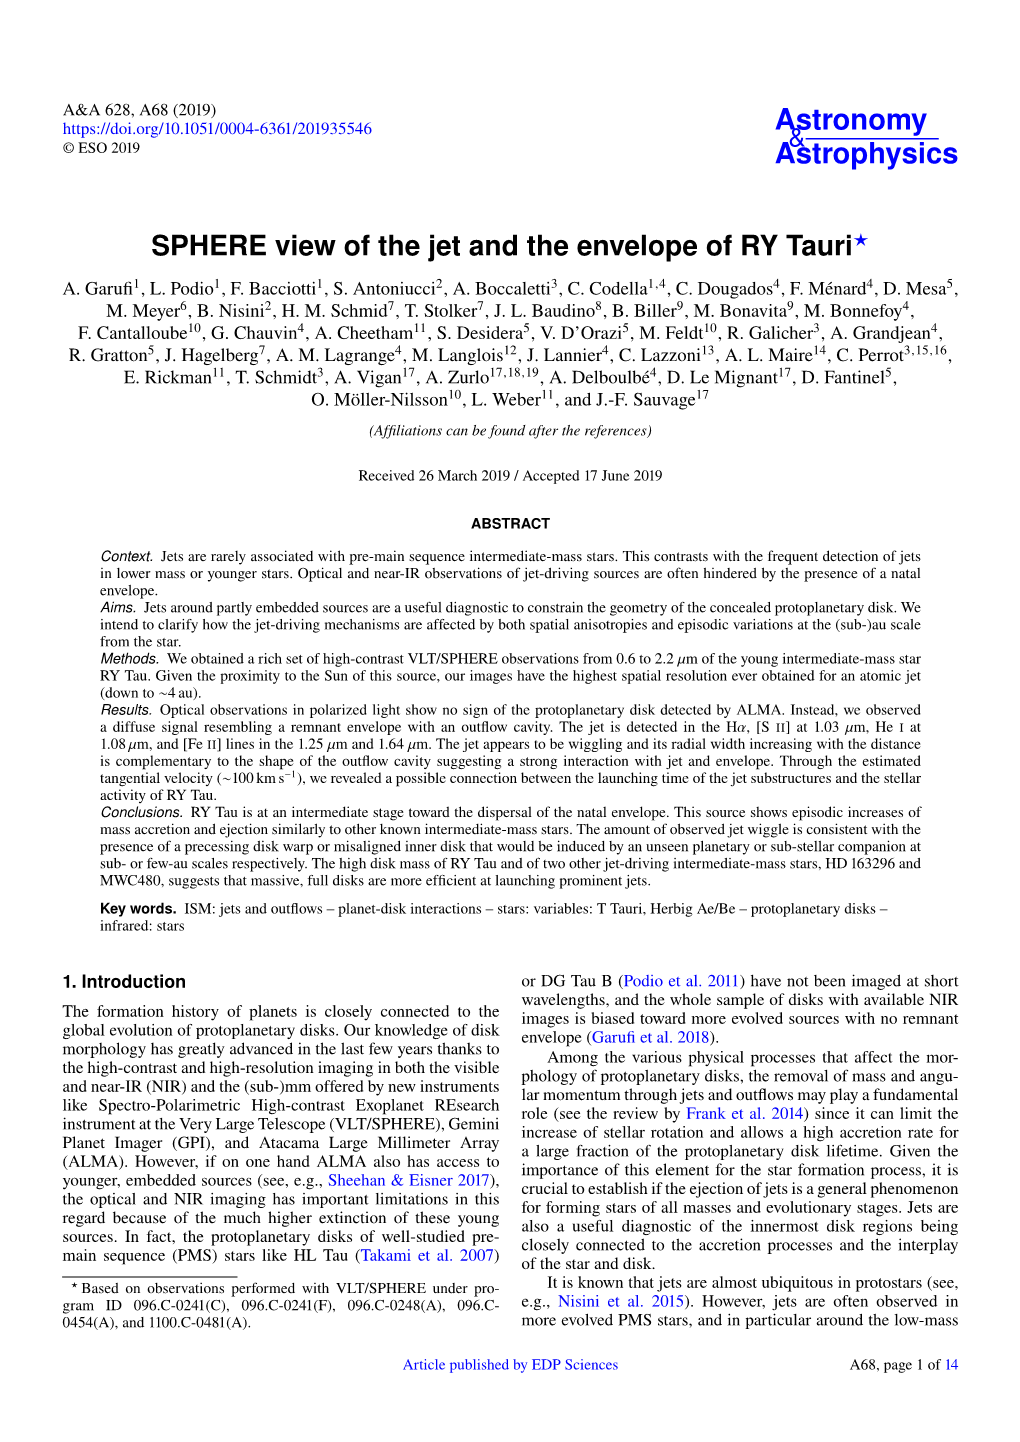 SPHERE View of the Jet and the Envelope of RY Tauri? A